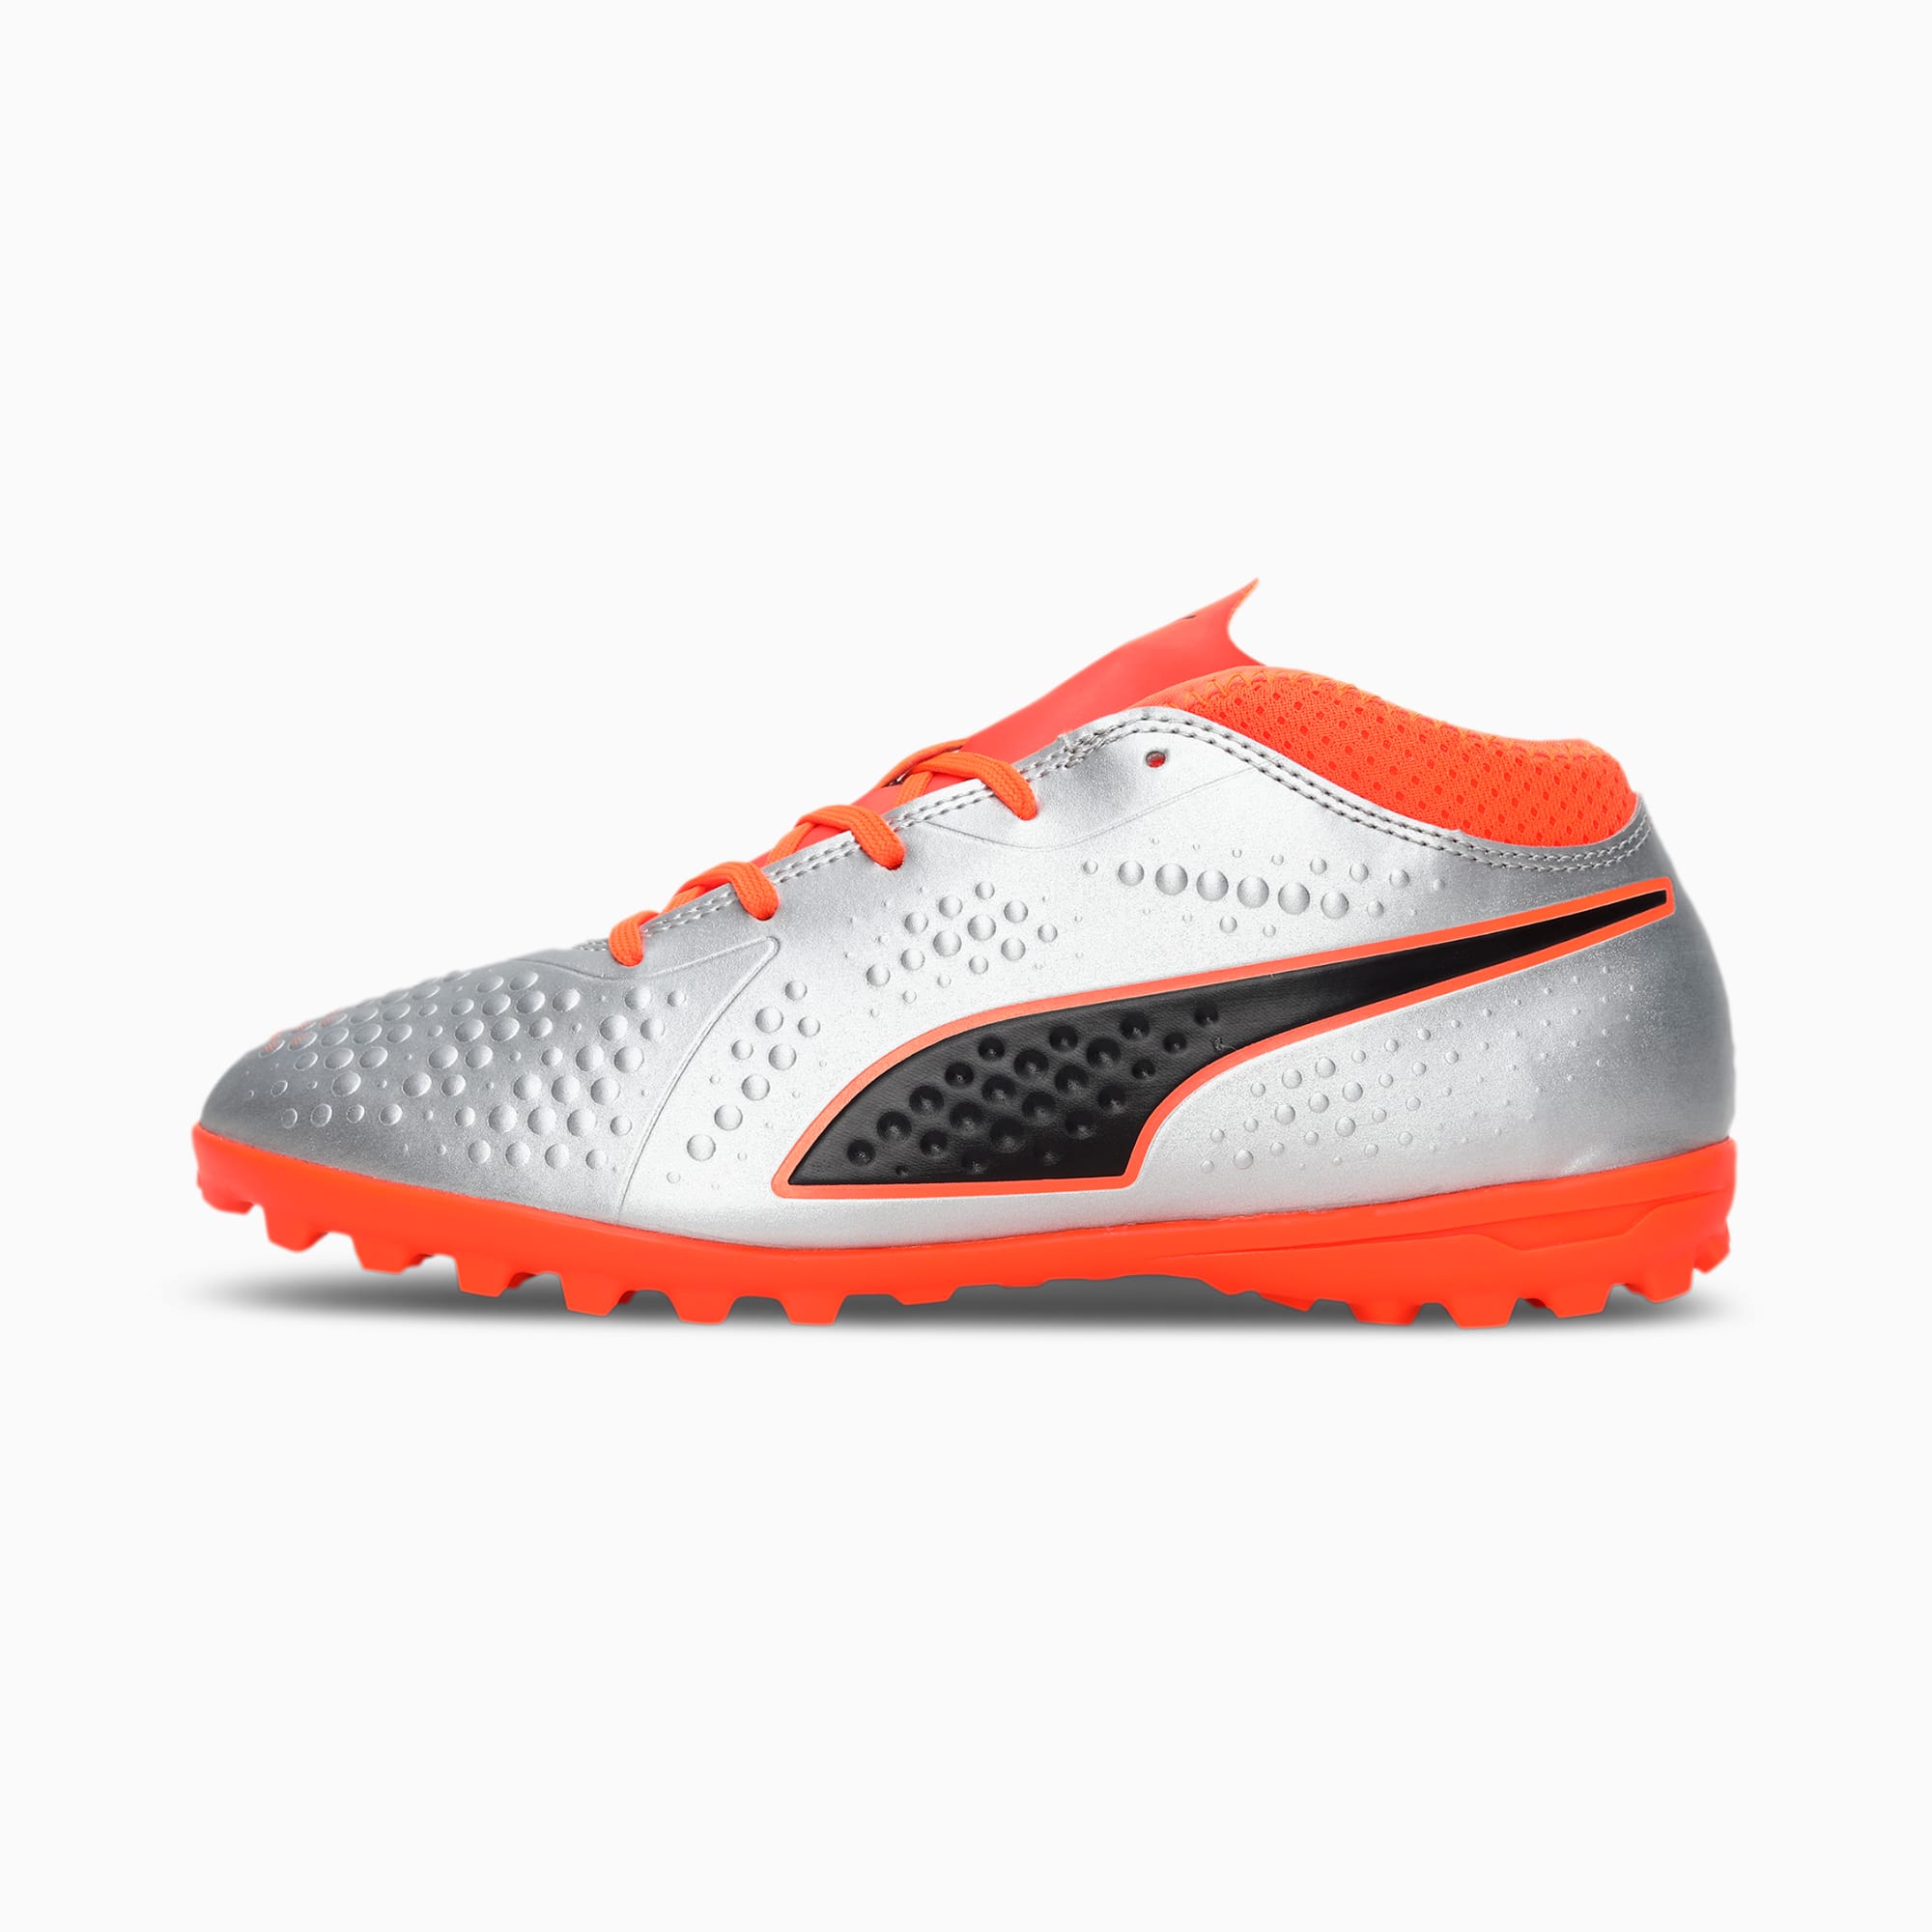 puma one indoor shoes